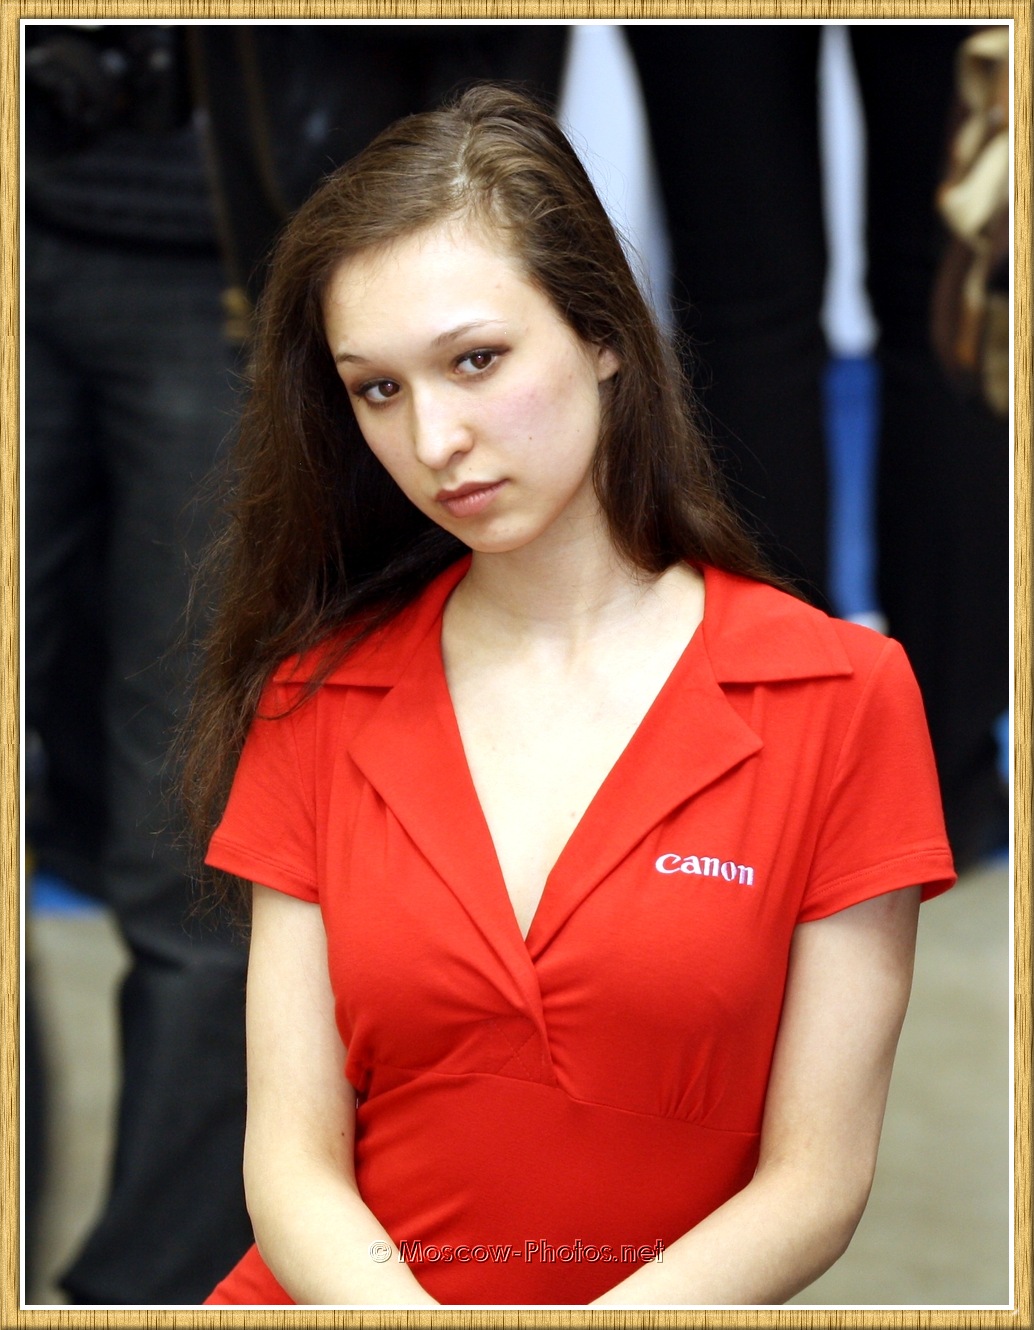 Canon promo girl in red dress at Photoforum 